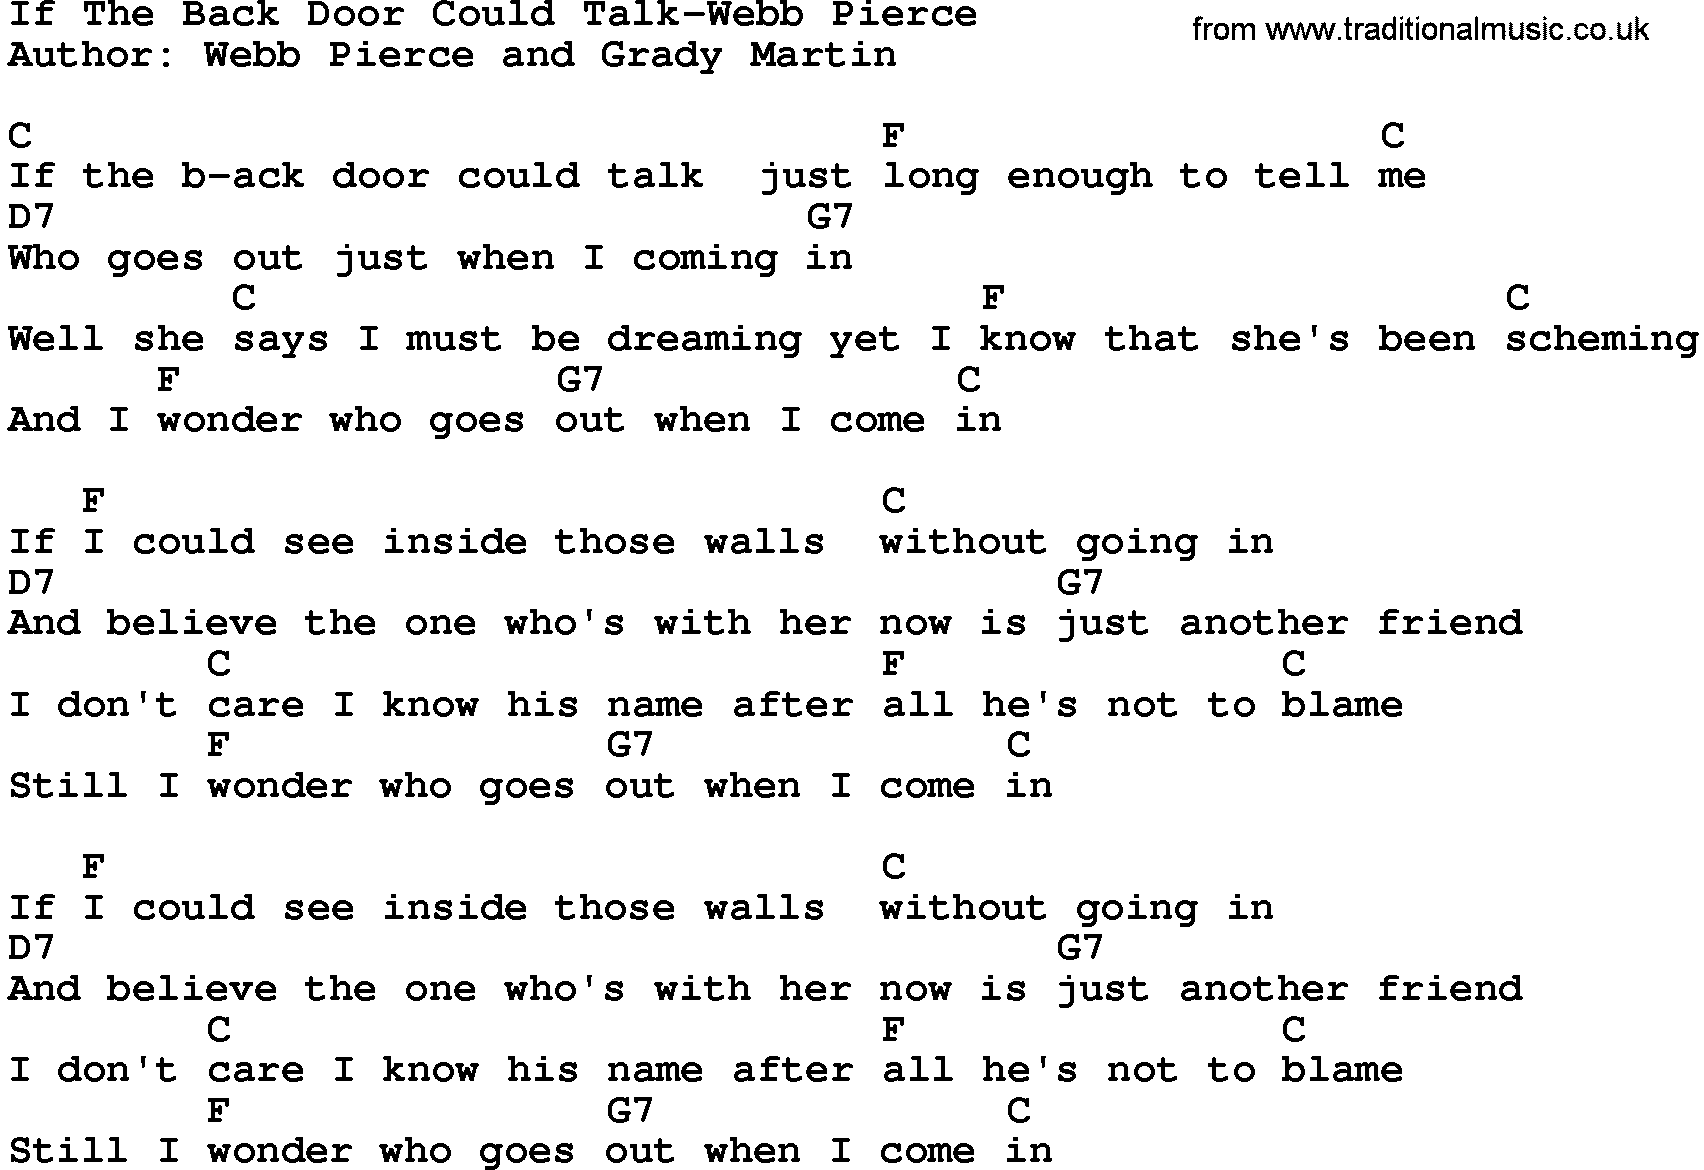 Country music song: If The Back Door Could Talk-Webb Pierce lyrics and chords